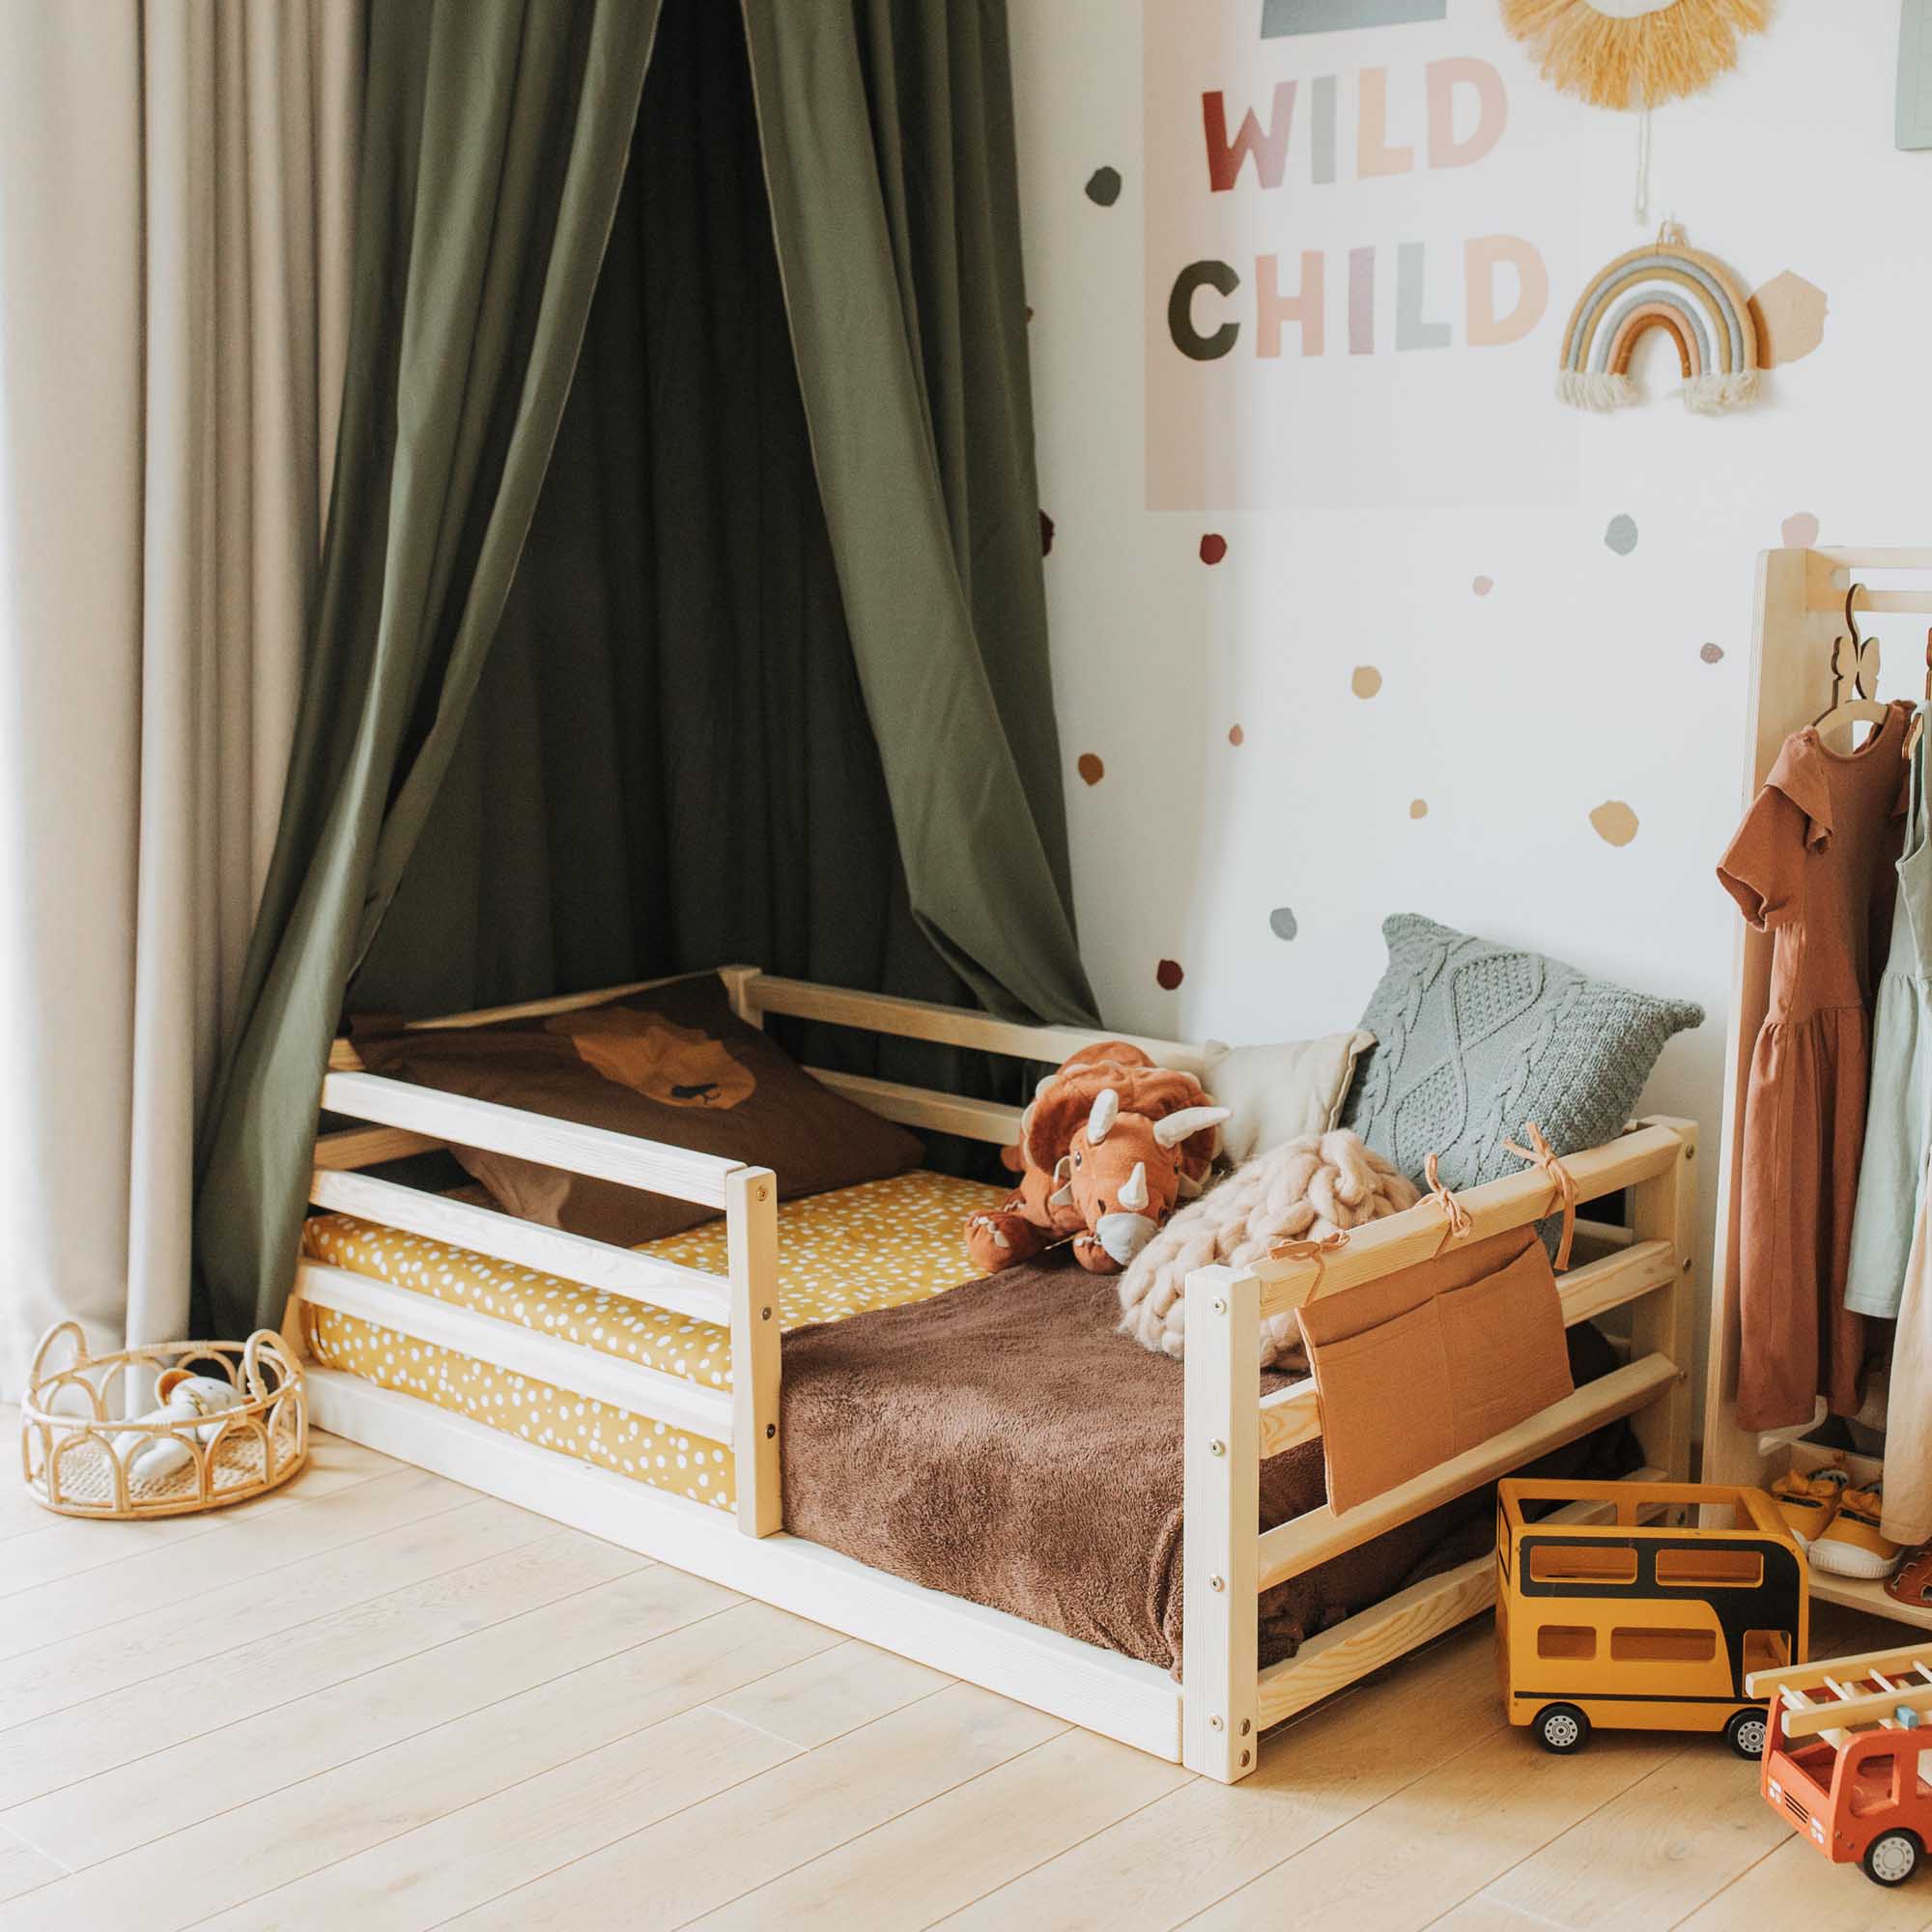 A child's room with a bed and toys.